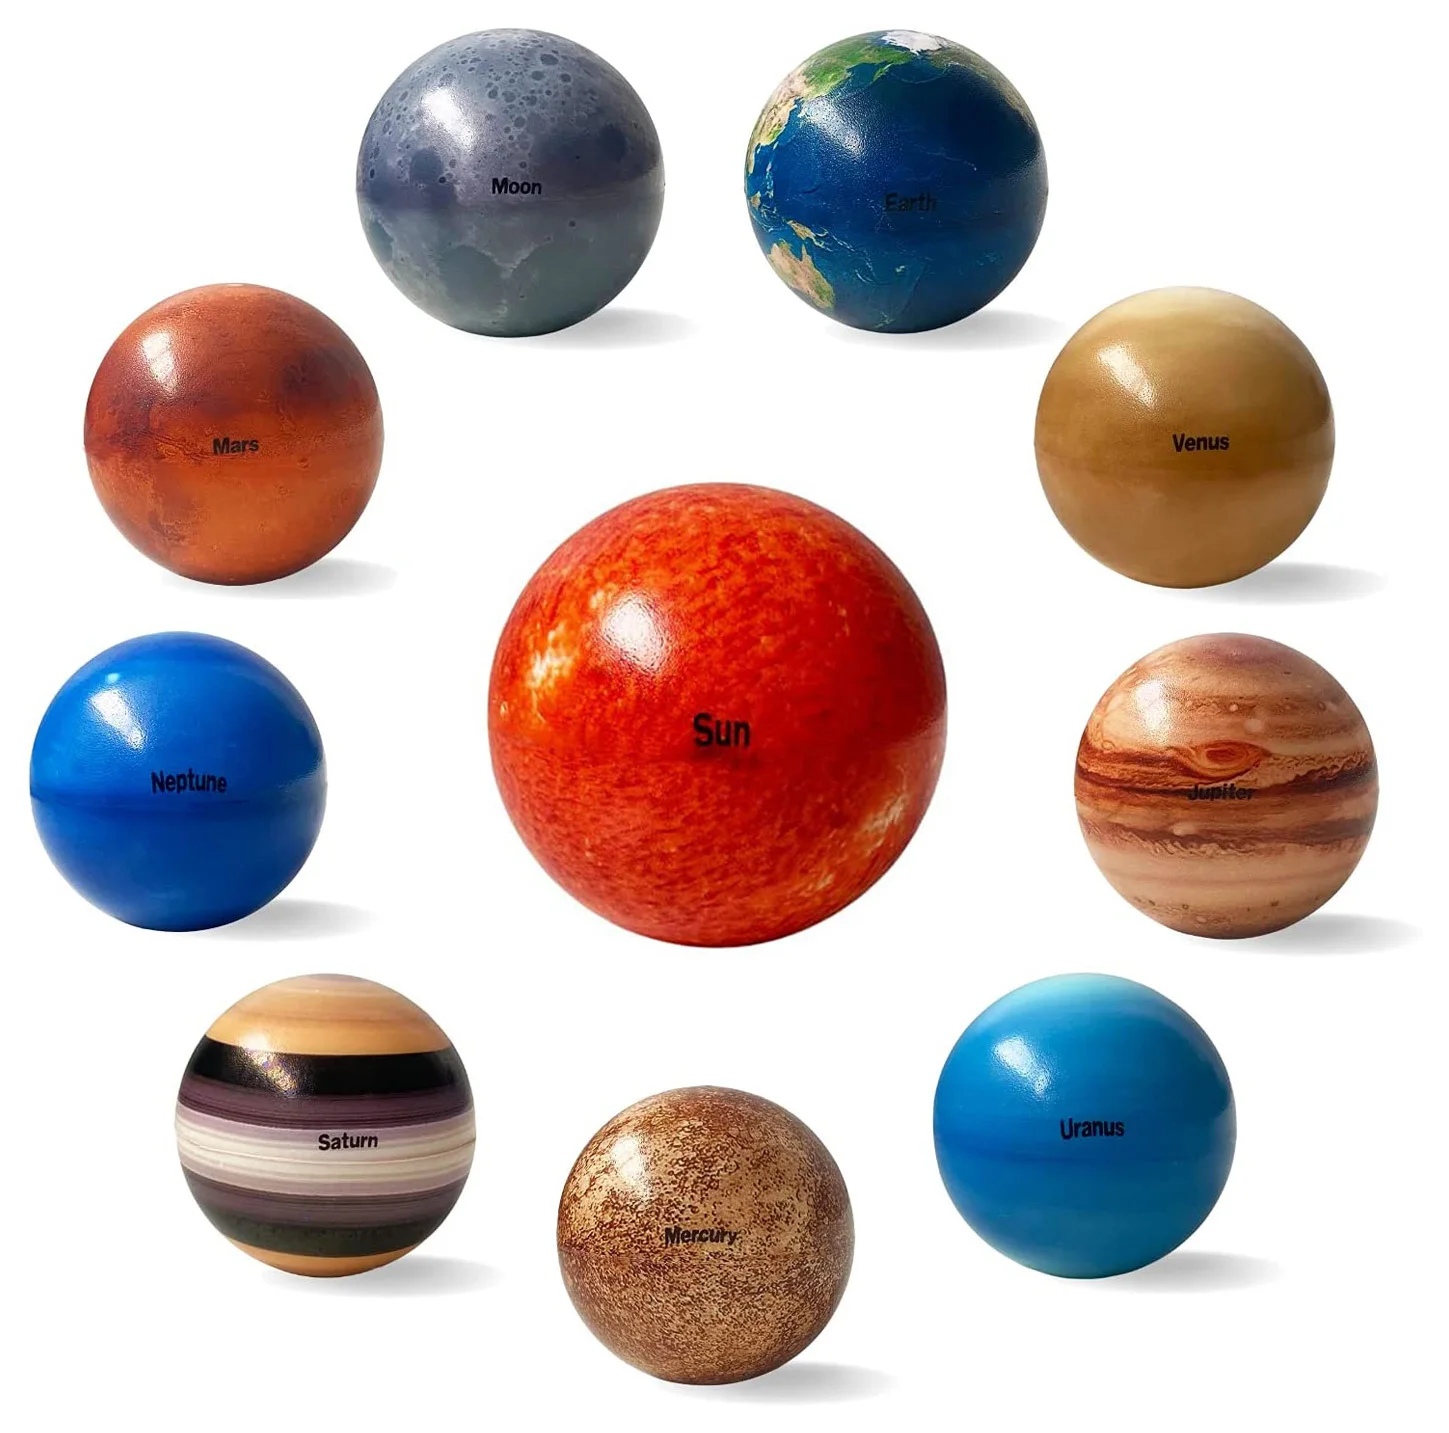 

10 Pcs Earth Solar System Planets Ball Space Galaxy Stress Relief Educational Toys Universe Kids Early Educational Toys Gift